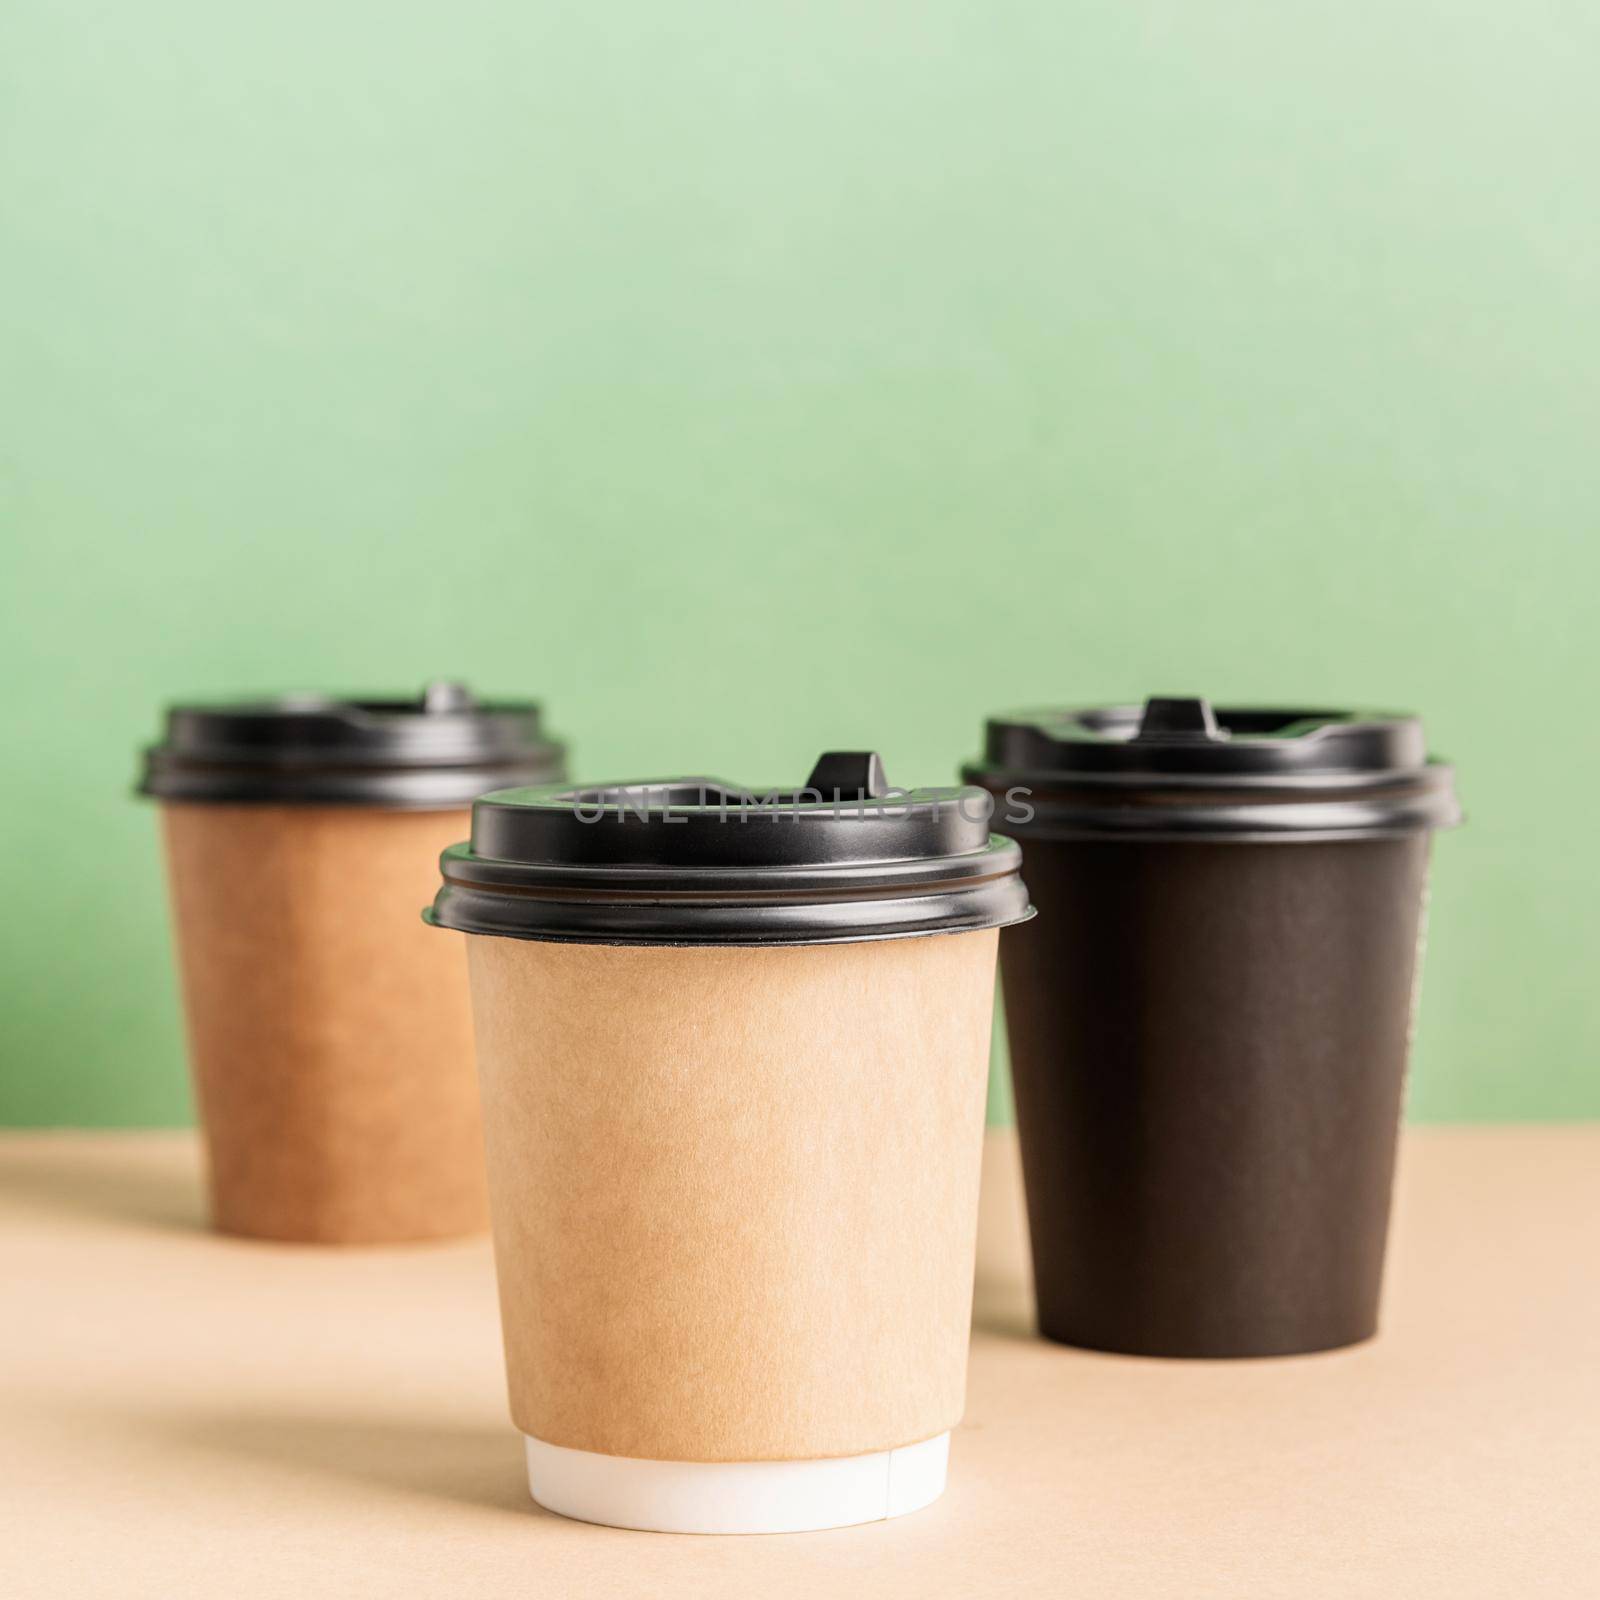 Black takeaway paper coffee cups mock up on green and brown background by Desperada